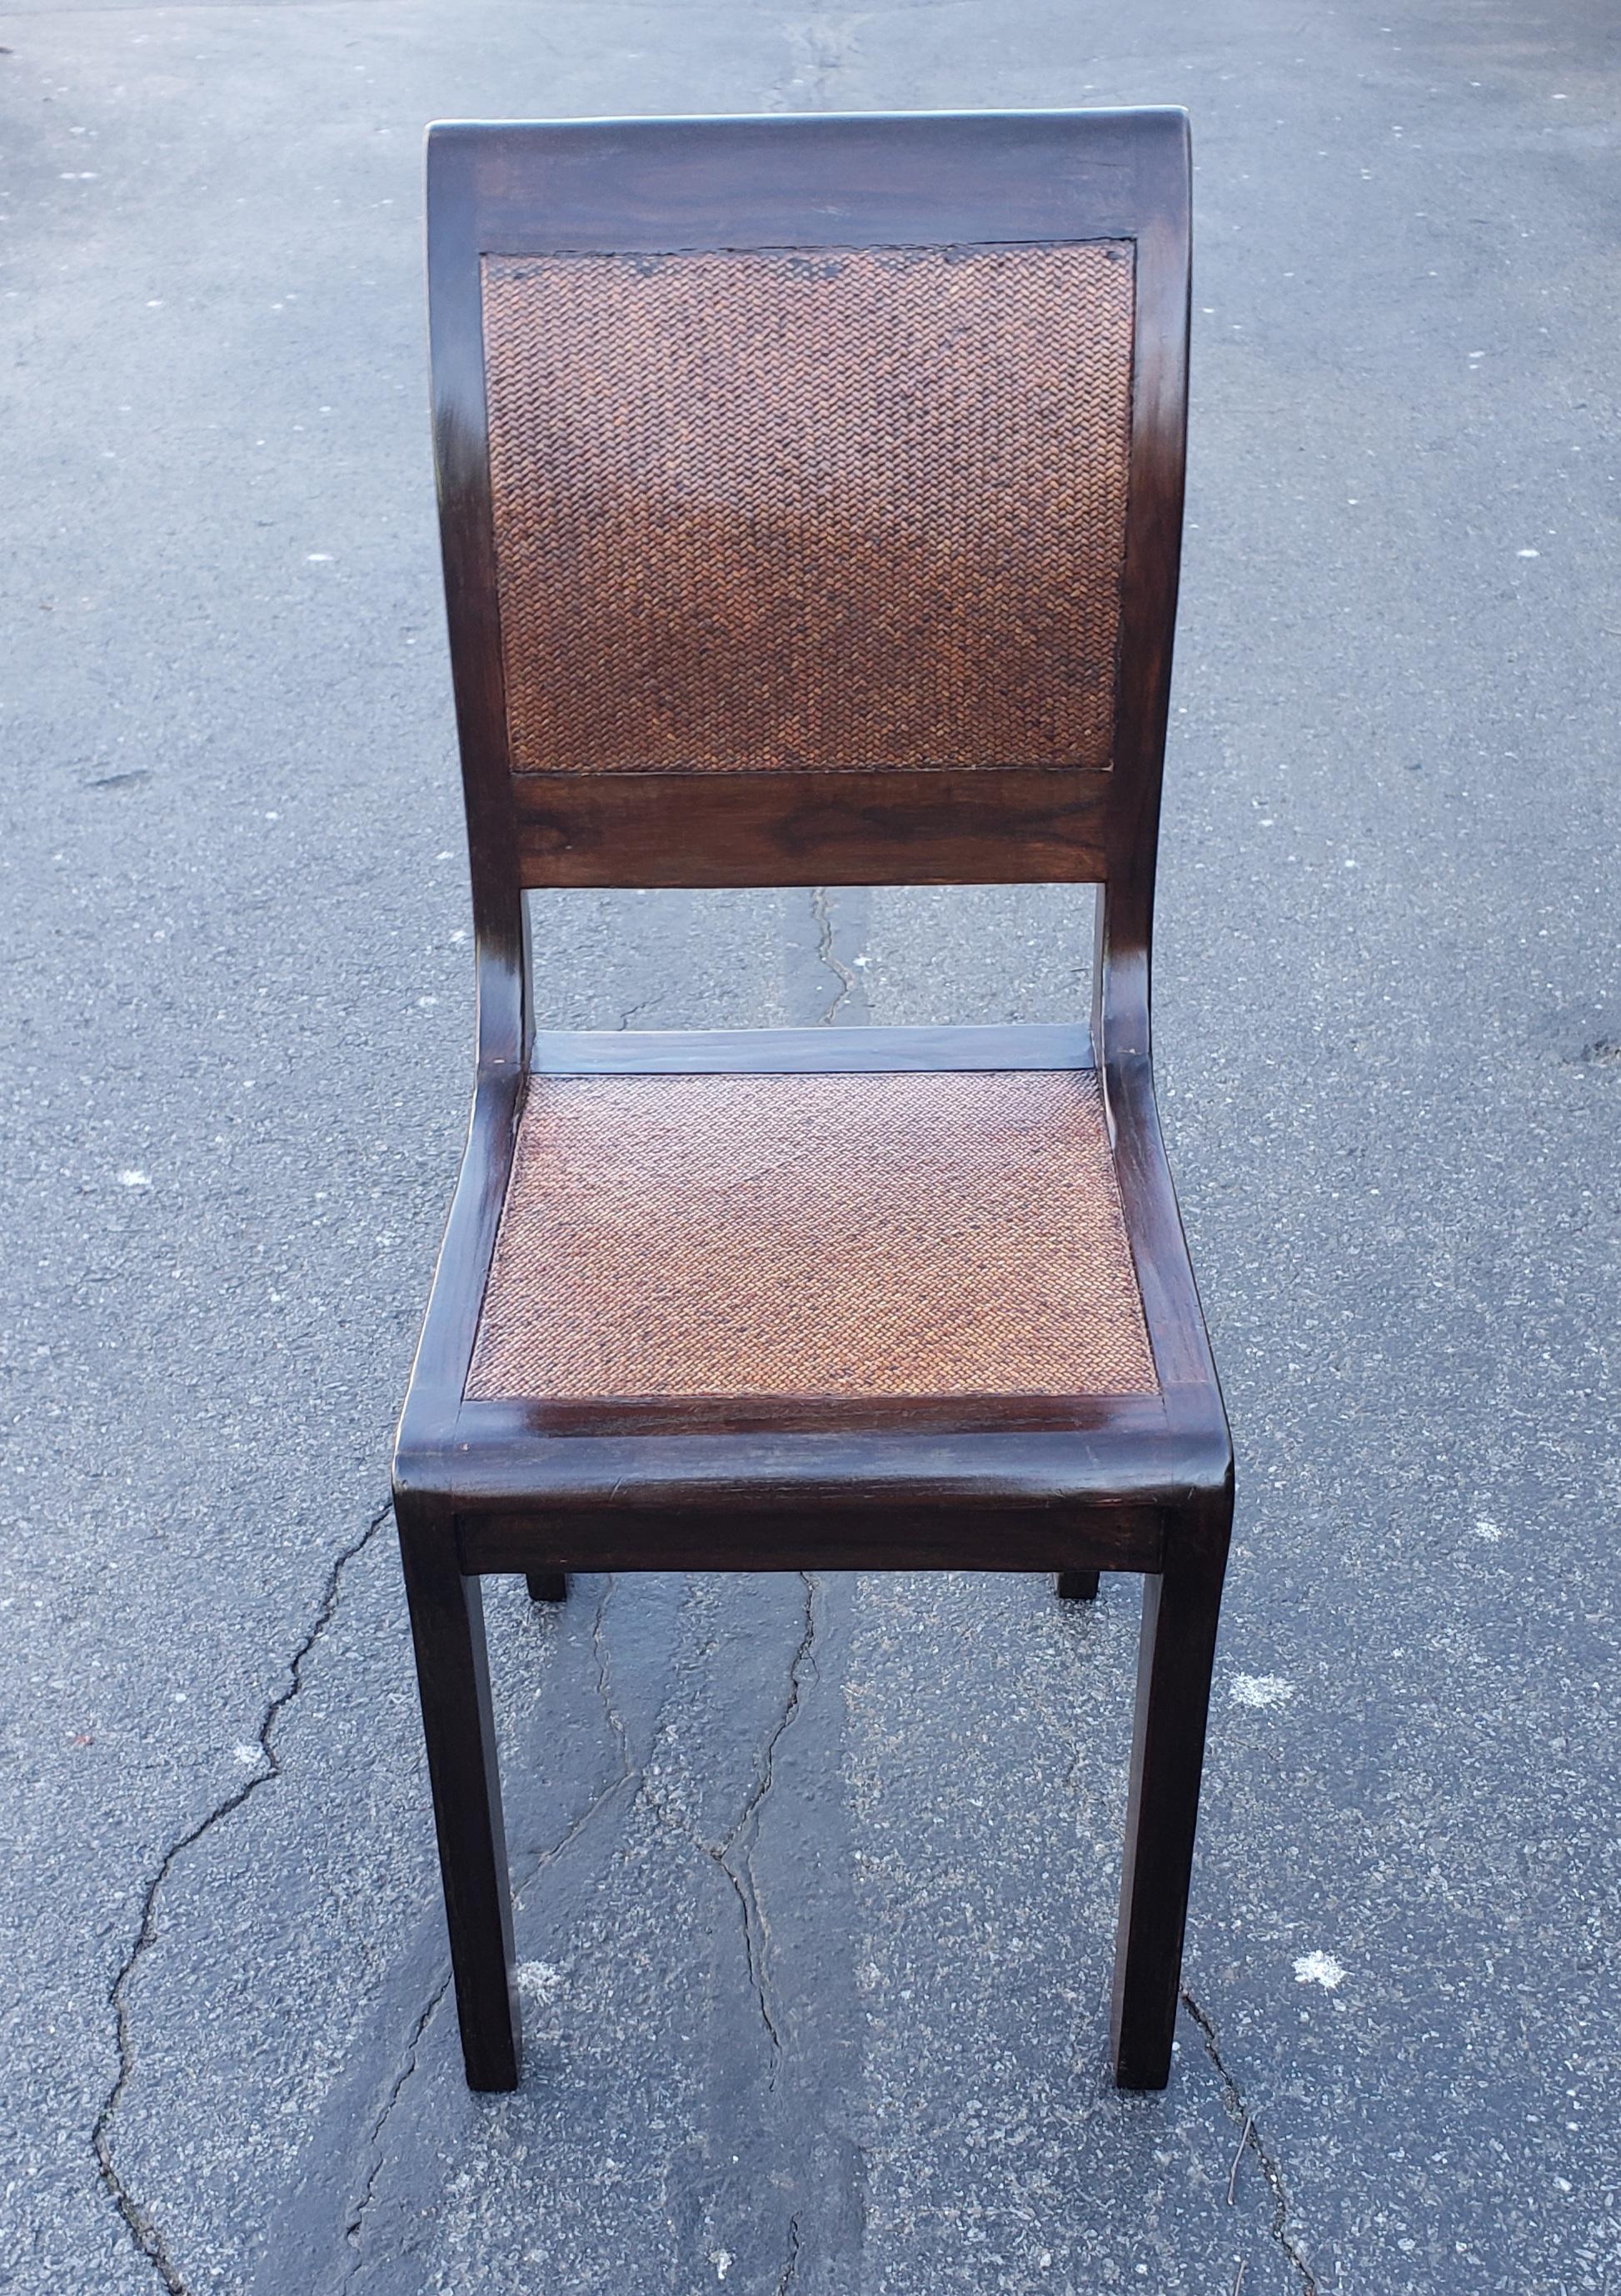 Pair of 1950s Rosewood and Braided Wicker over Hardwood Seat and Back Chairs In Good Condition For Sale In Germantown, MD